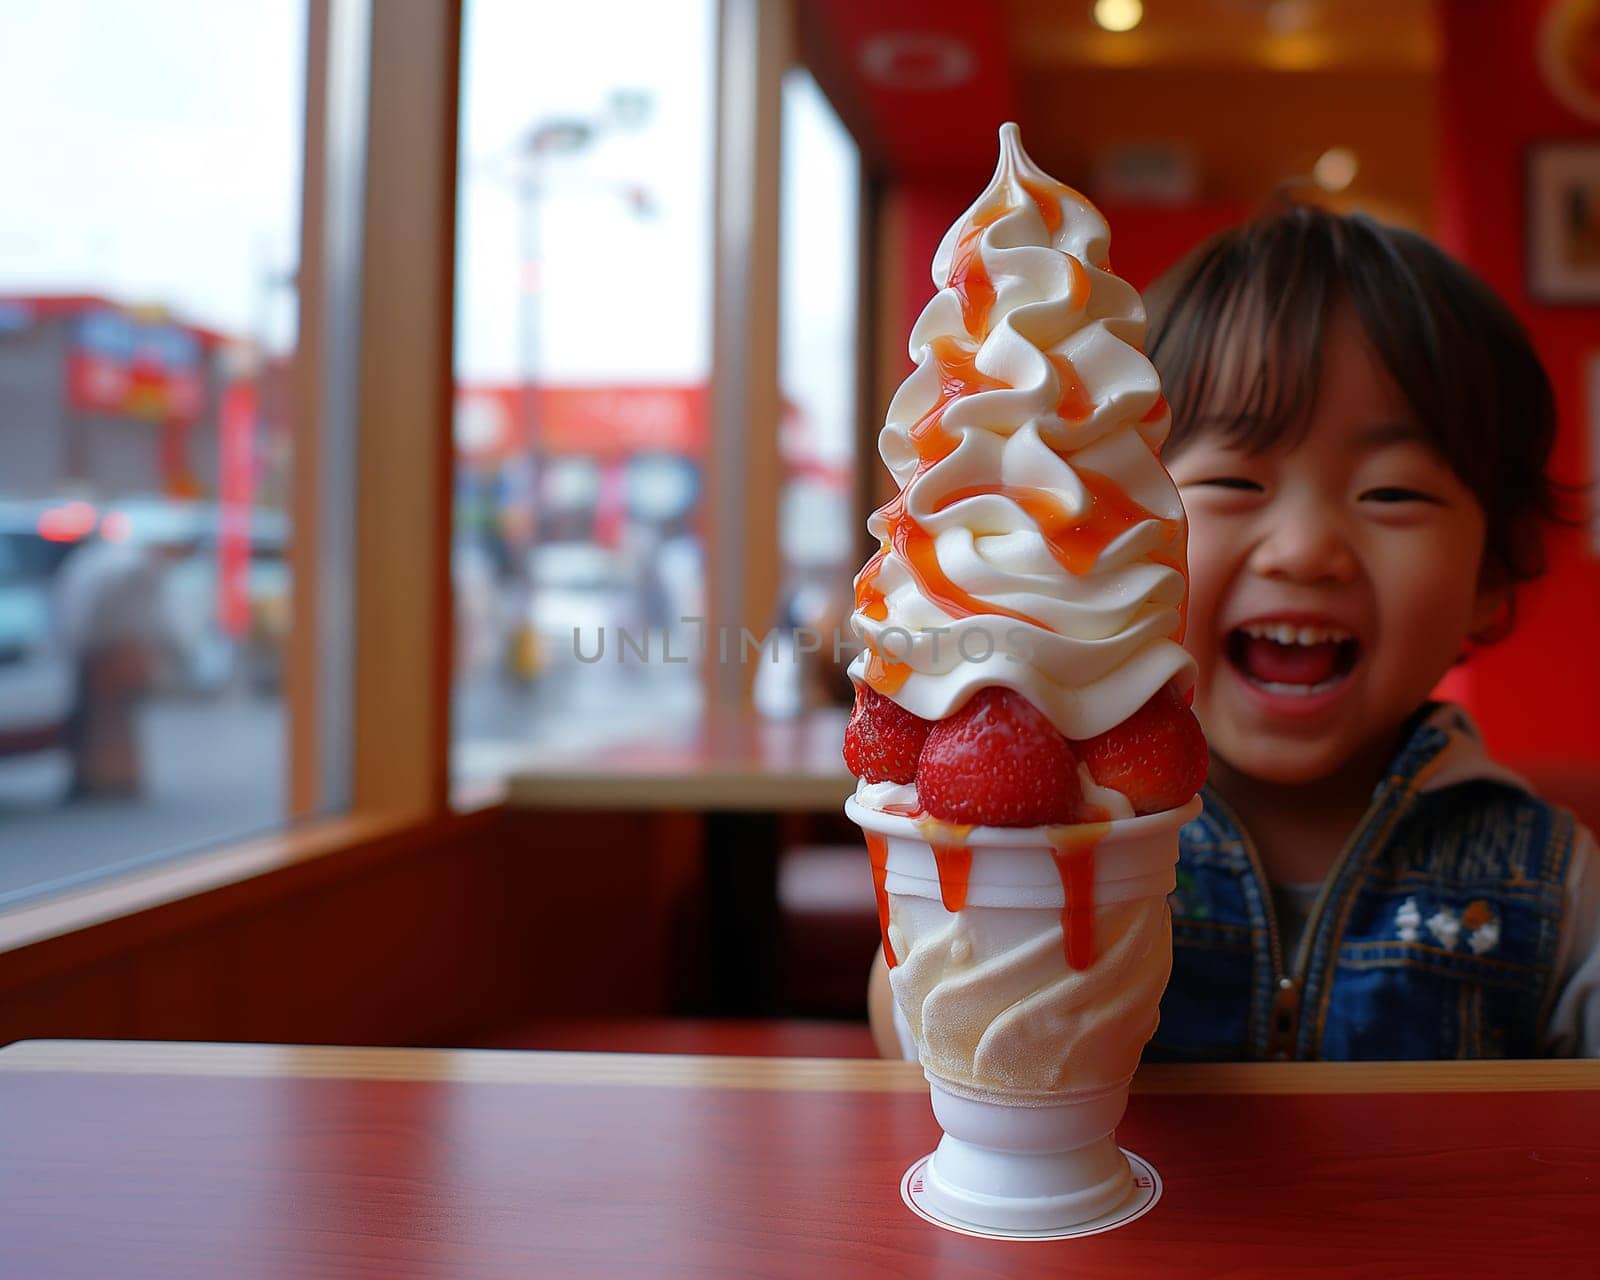 A joyful child smiles beside a large strawberry topped soft serve ice cream. by Hype2art